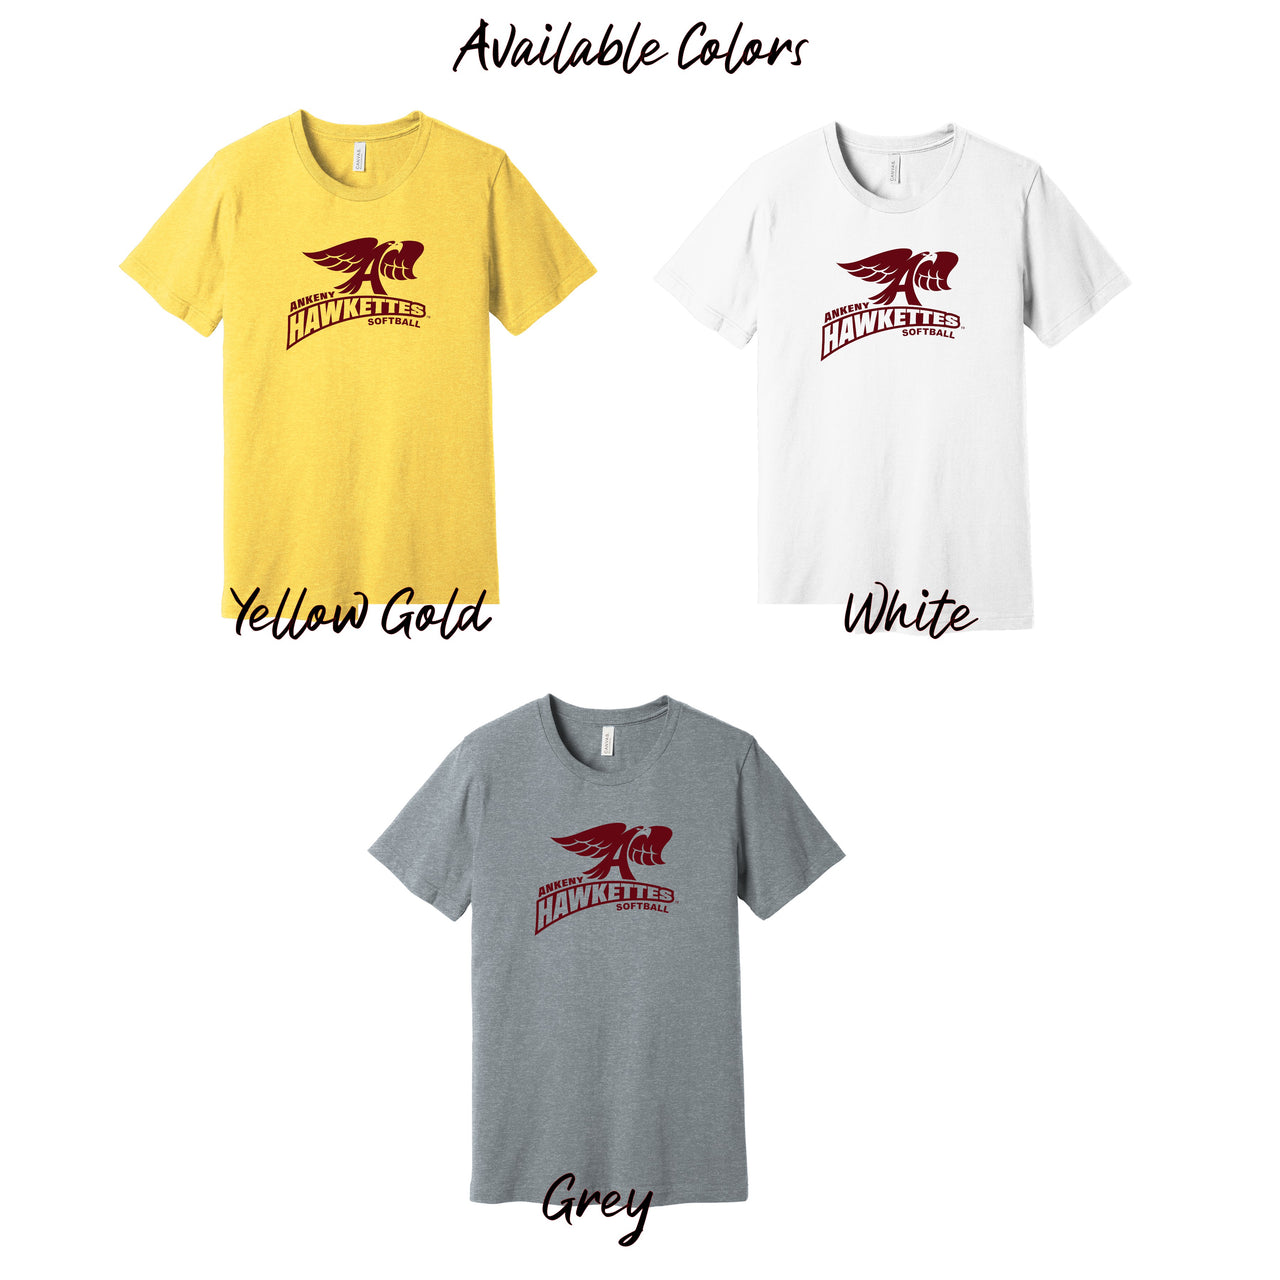 Adult & Youth - Unisex Cotton/Poly Tee (Ankeny Hawkette Softball)